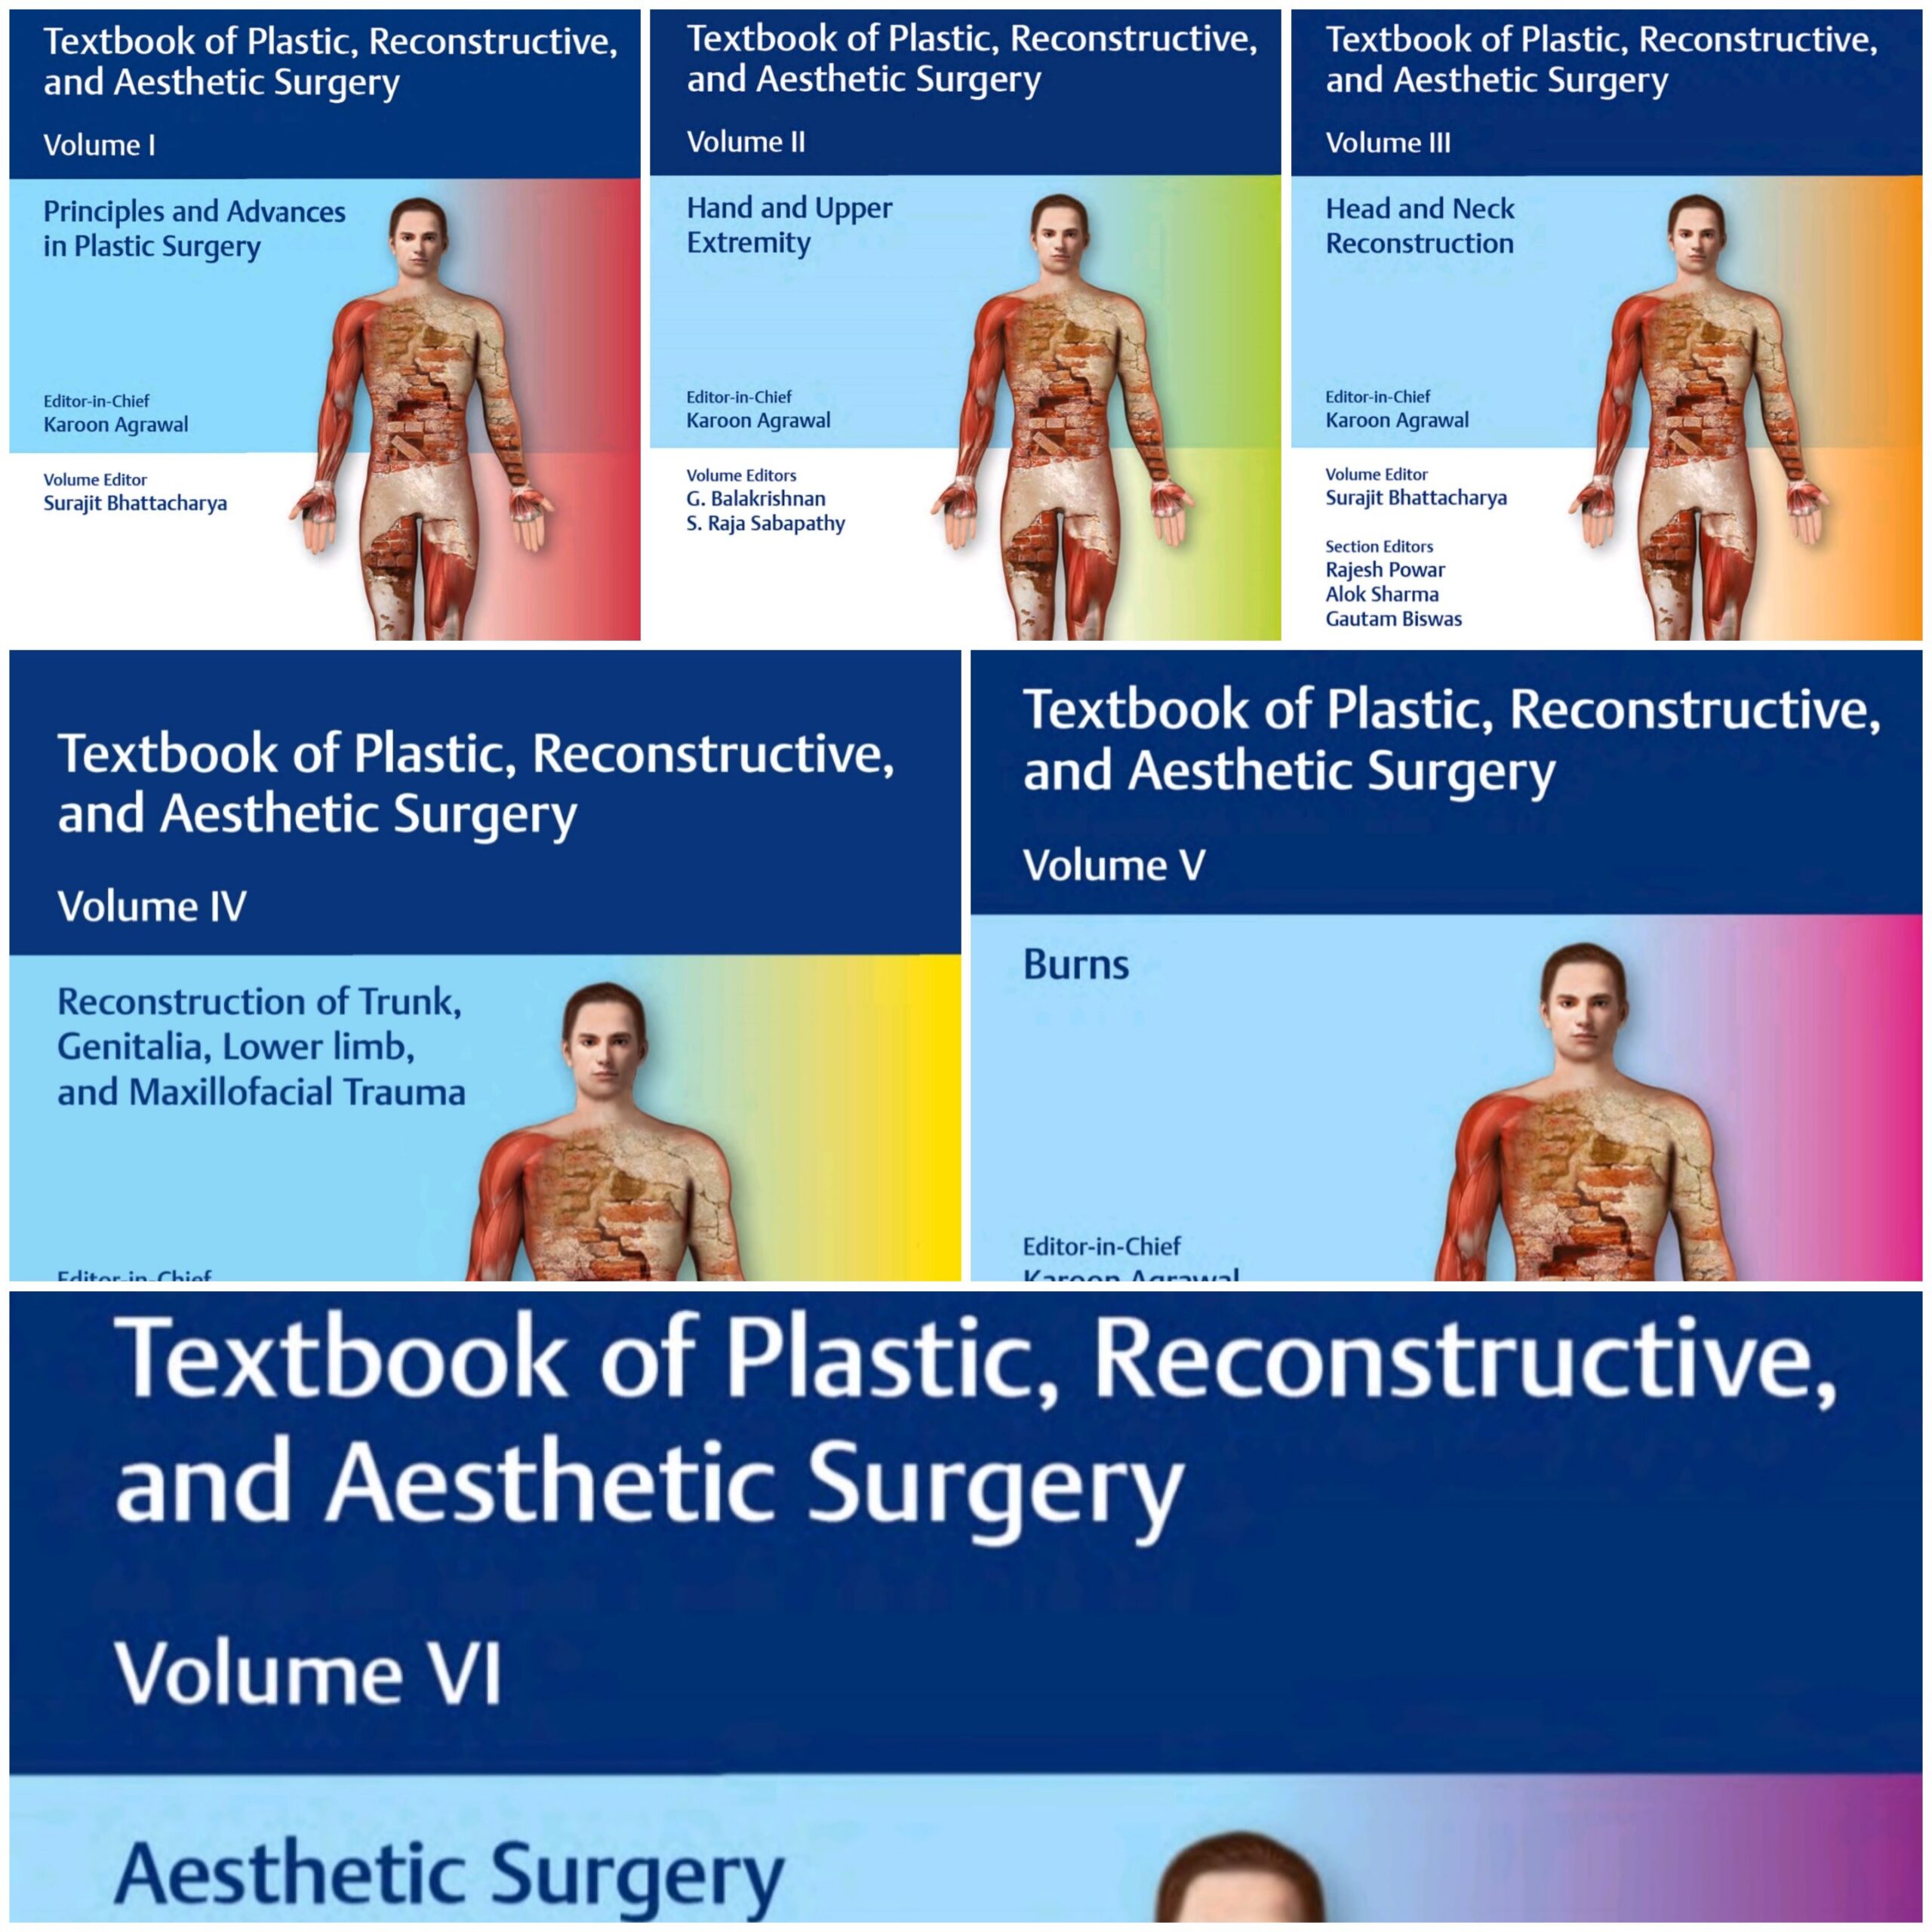 Textbook of Plastic,Reconstructive and Aesthetic Surgery SIX-6 Volumes-Set 2022